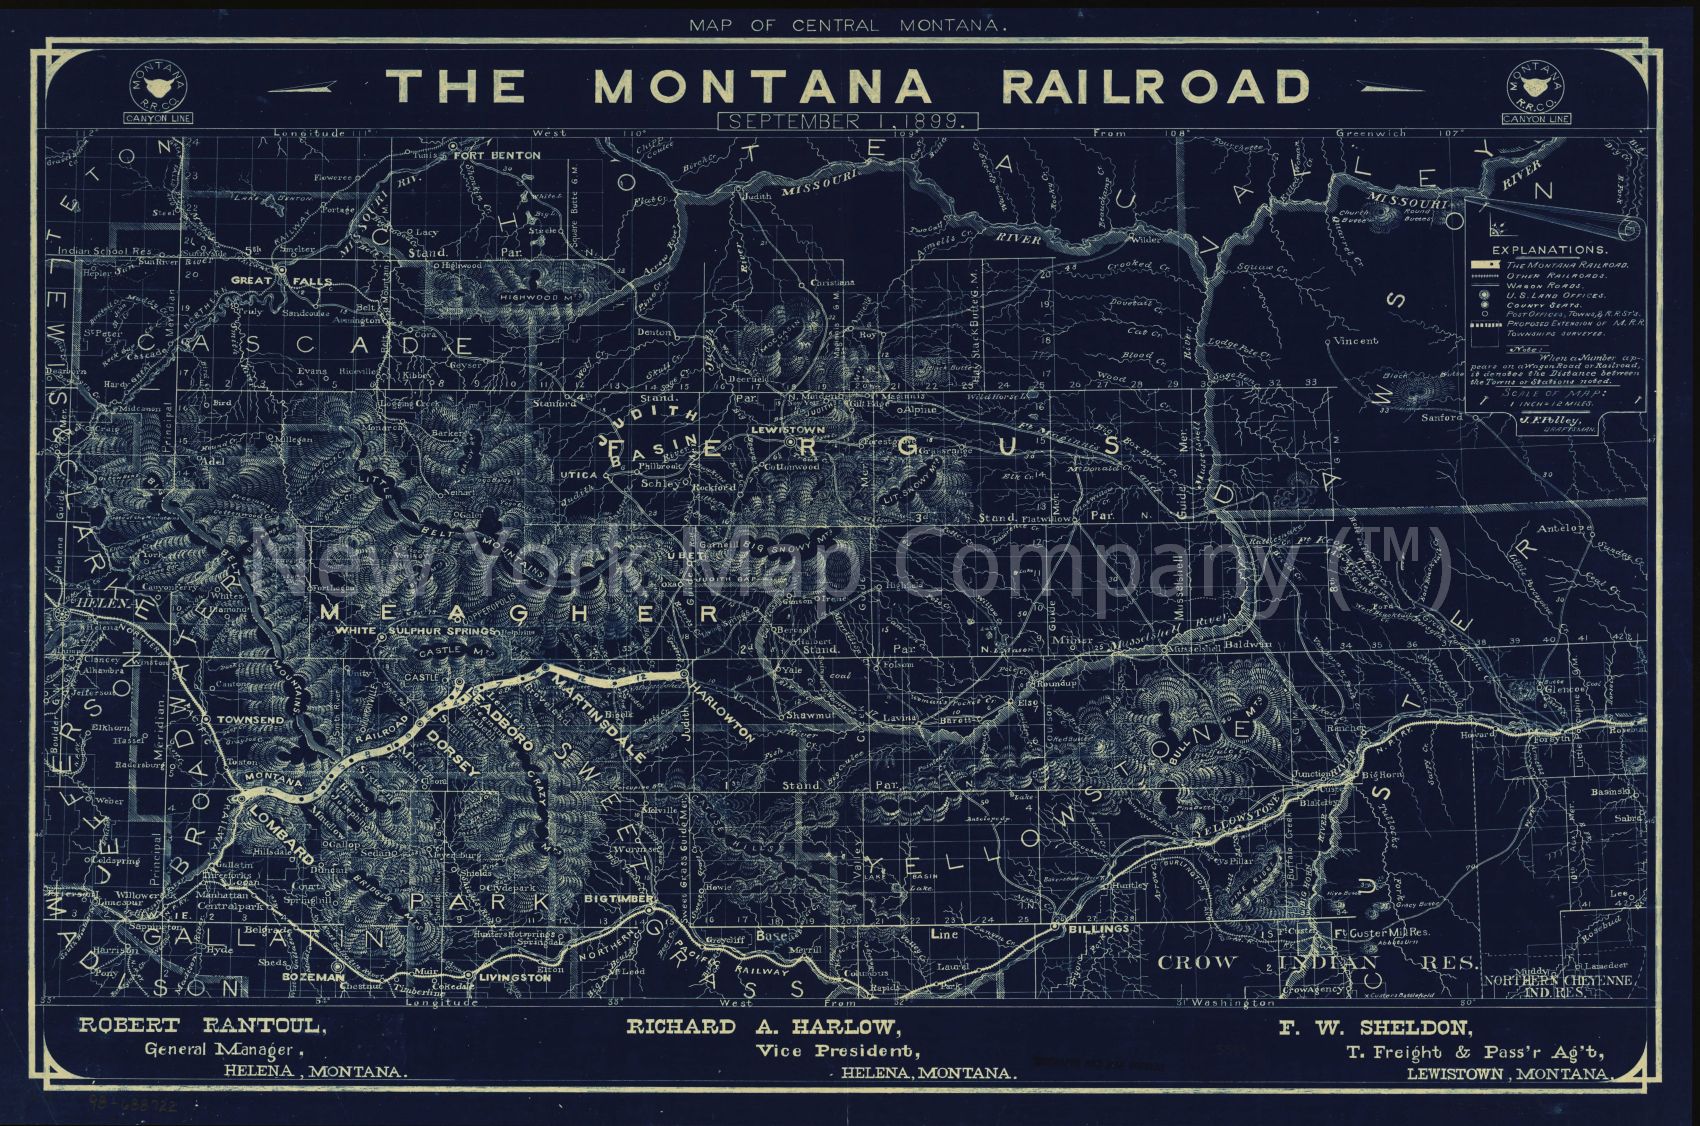 1899 map of central Montana, the Montana Railroad, September 1, 1899. Shows relief by hachures, drainage, township and county boundaries, military reservations, wagon roads, and railroads. Map Subjects: Montana | Montana Railroad |